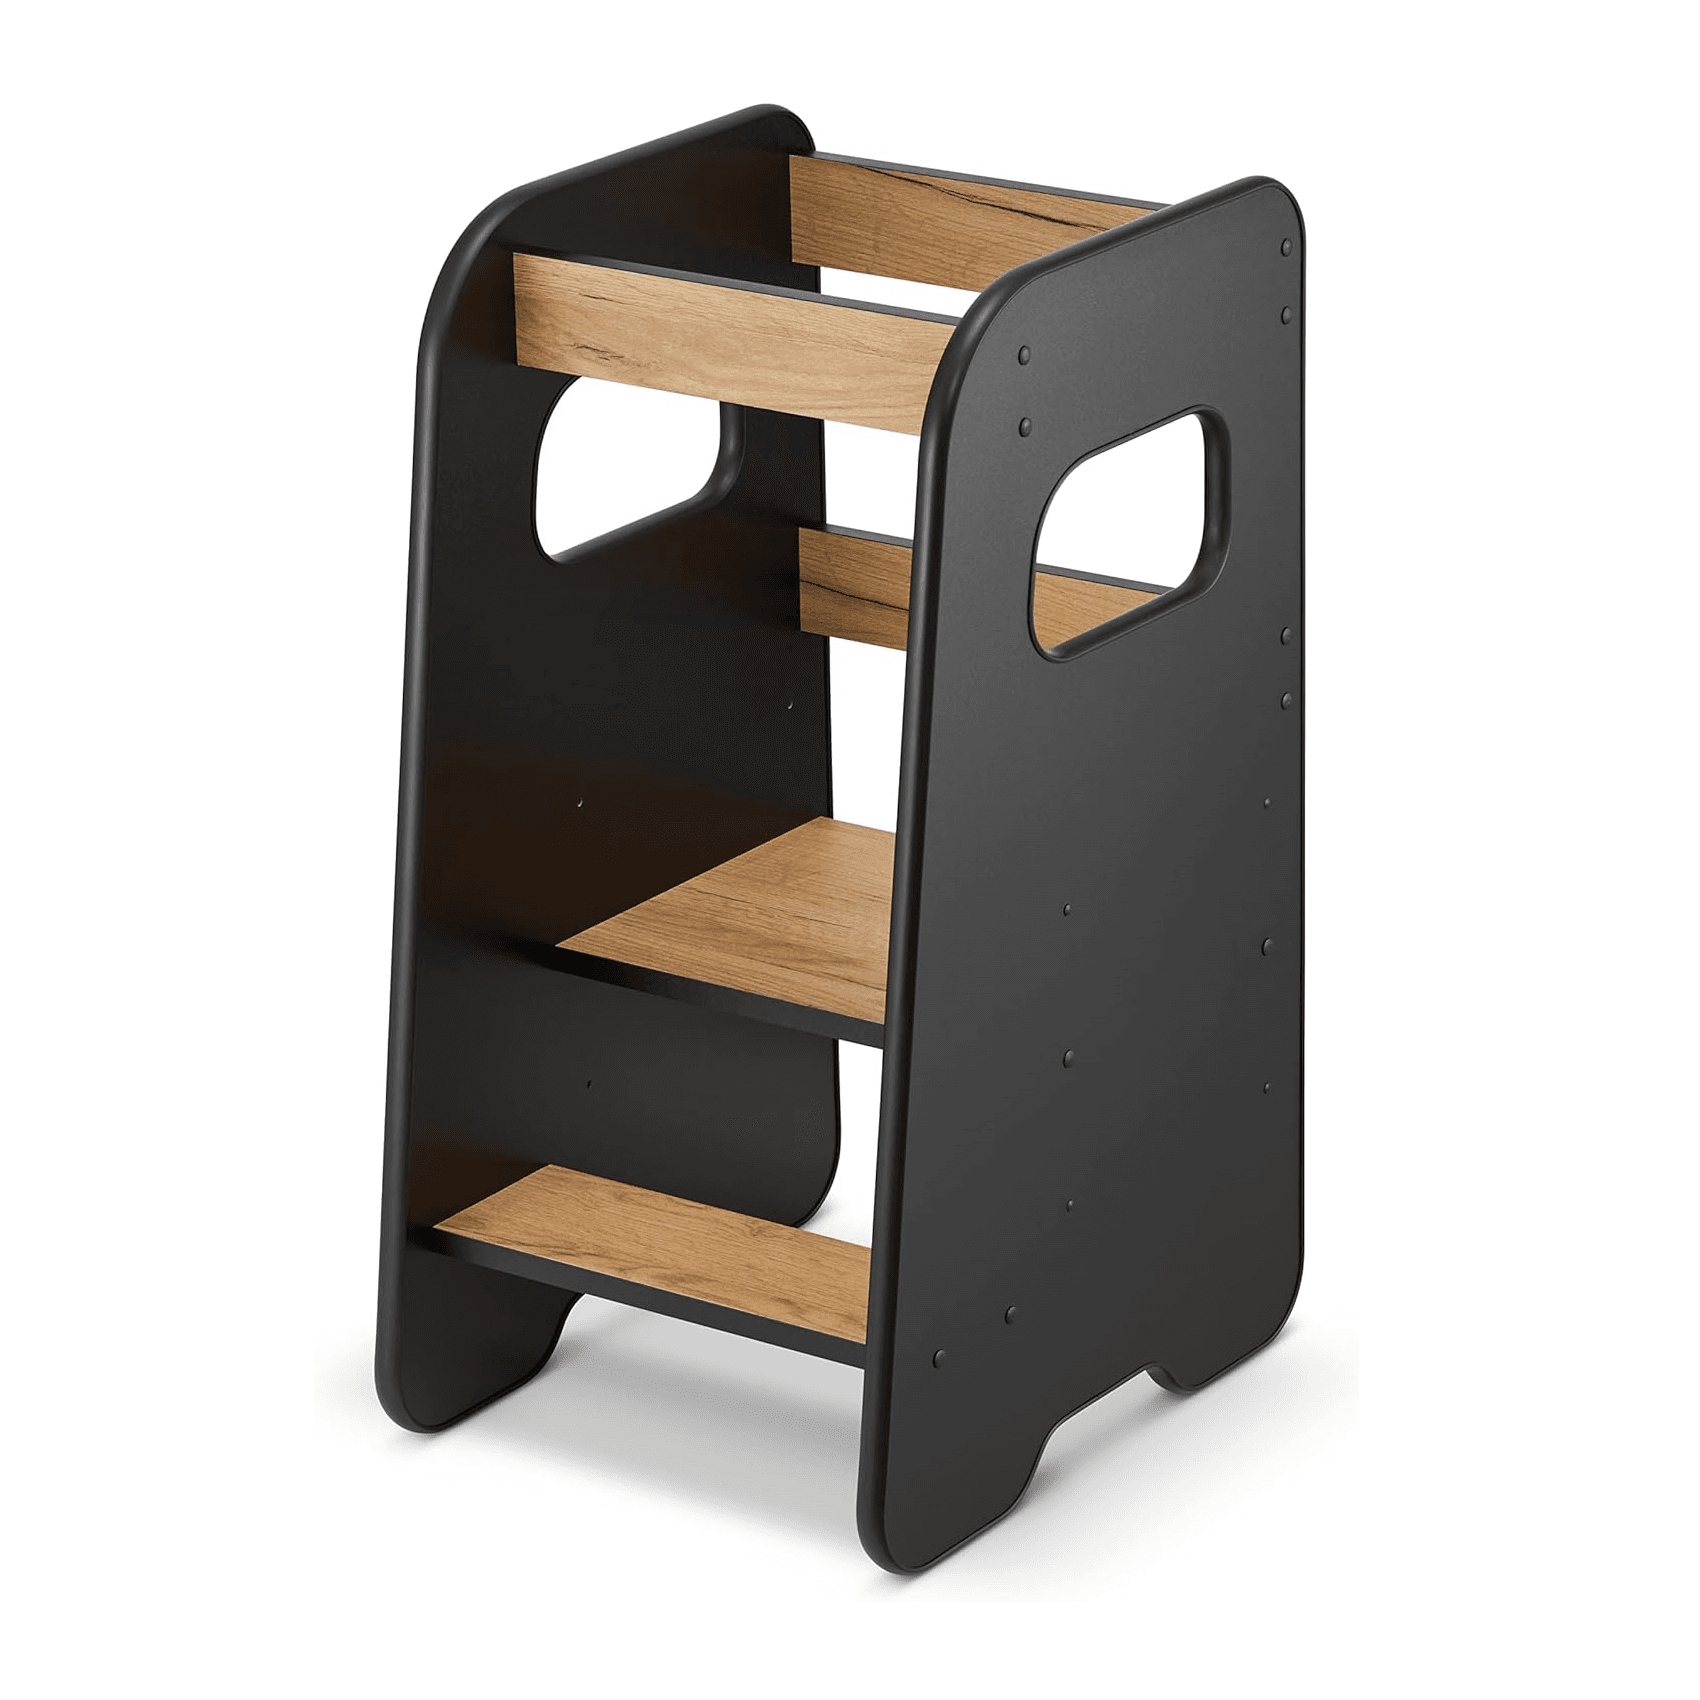 Montessori RONMALL Toddler Tower With Rubberized Edges Oak & Black